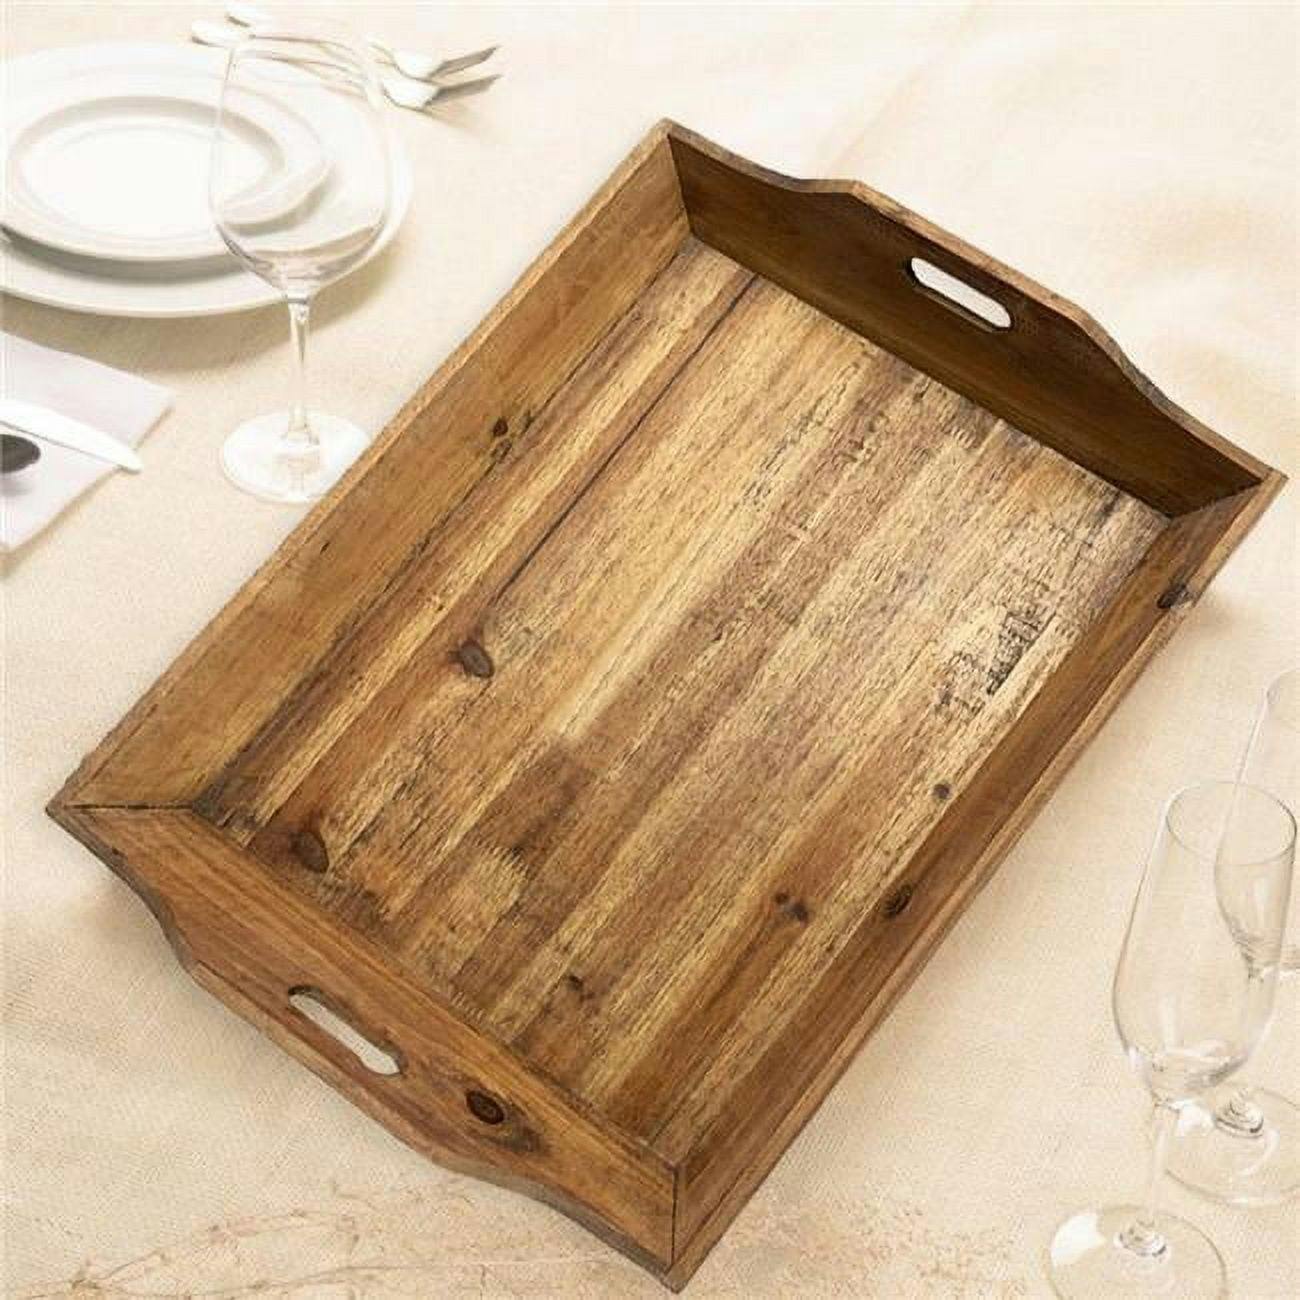 Country Cottage Natural & Brown Wooden Serving Tray Set - 3 Pieces